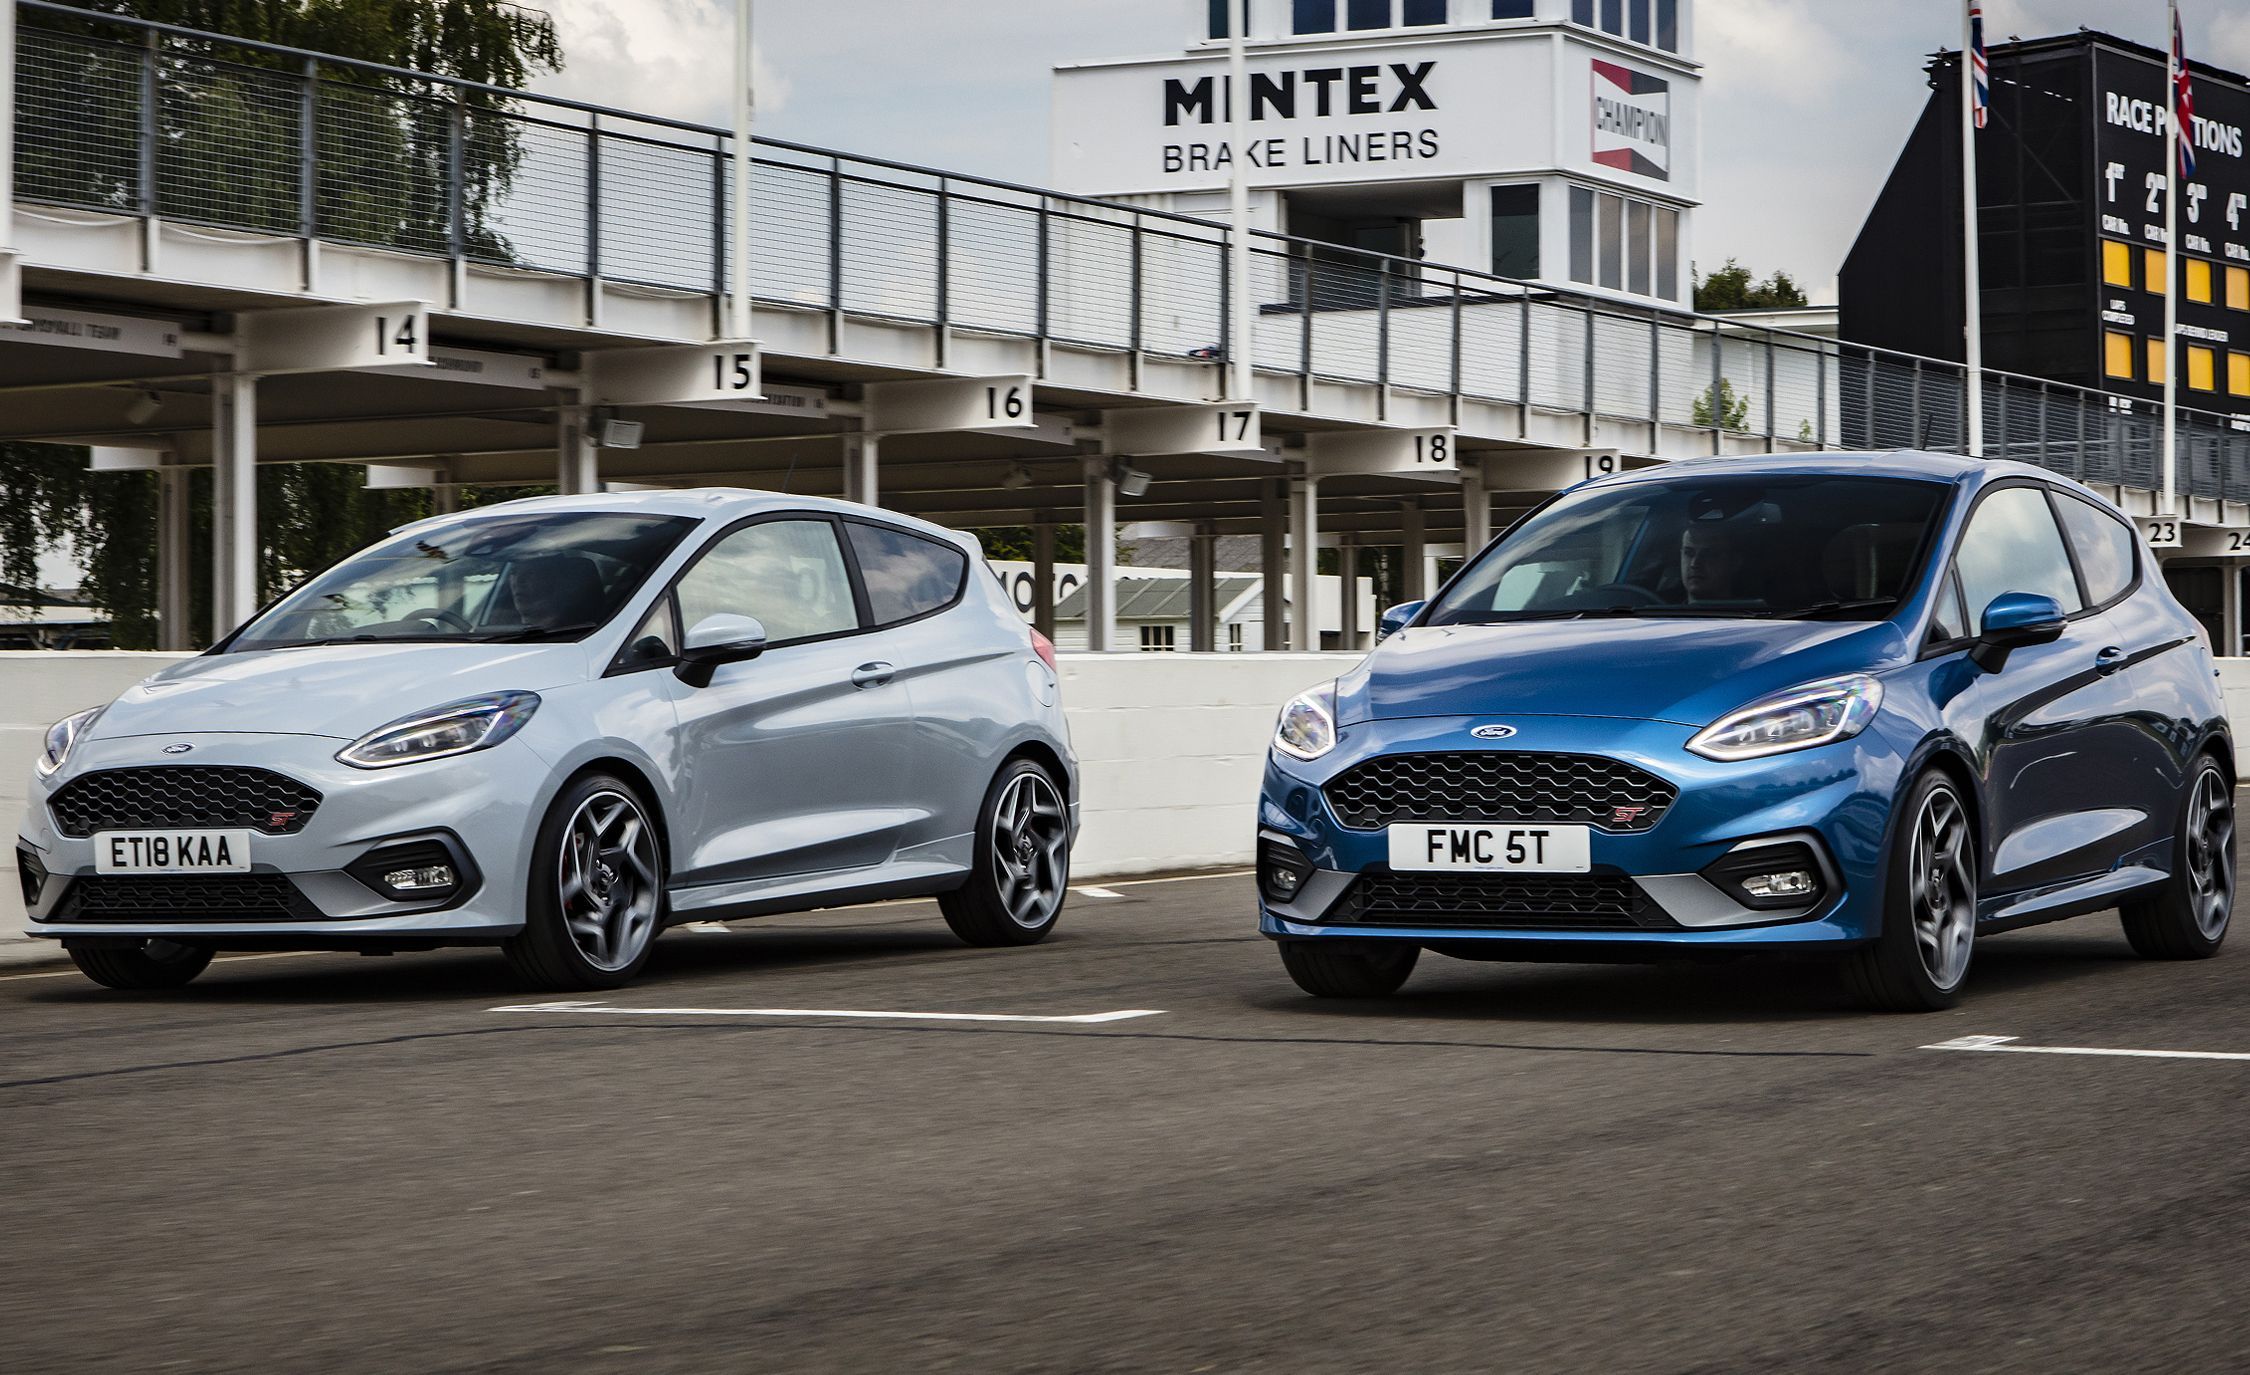 2018 Ford Fiesta St_0 (Gallery 51 of 51)